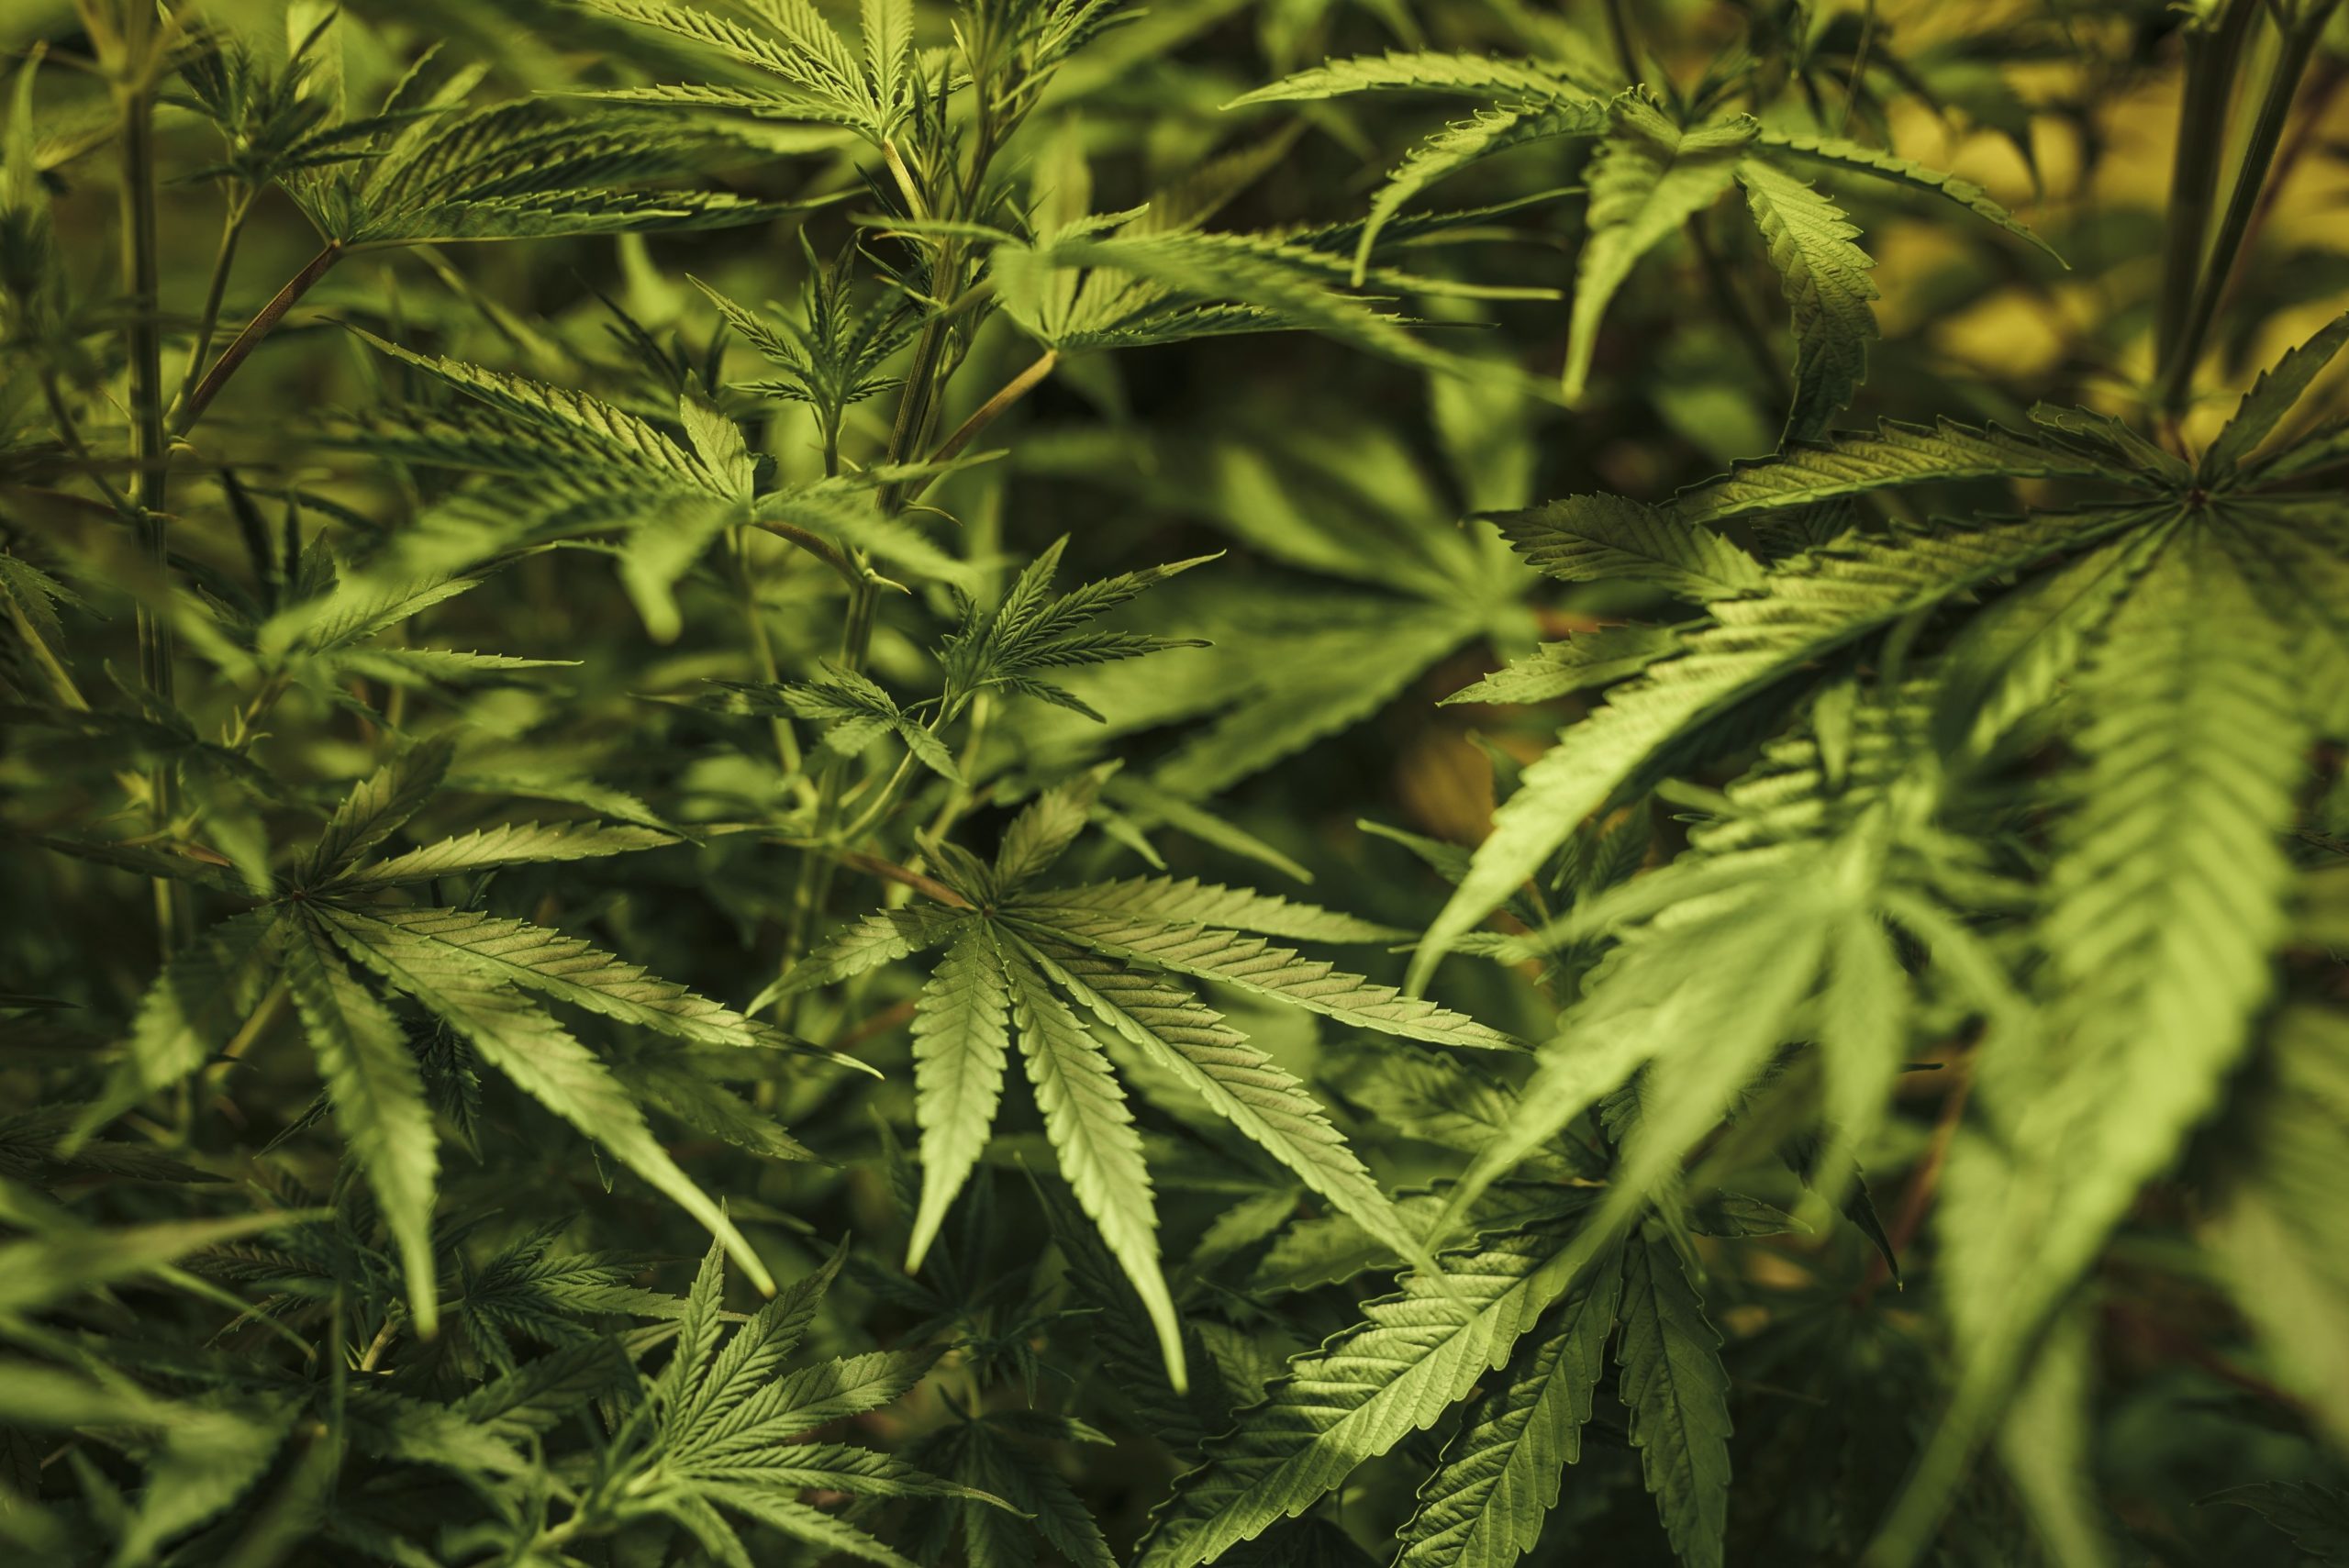 What marijuana production in Australia could mean for commercial real estate